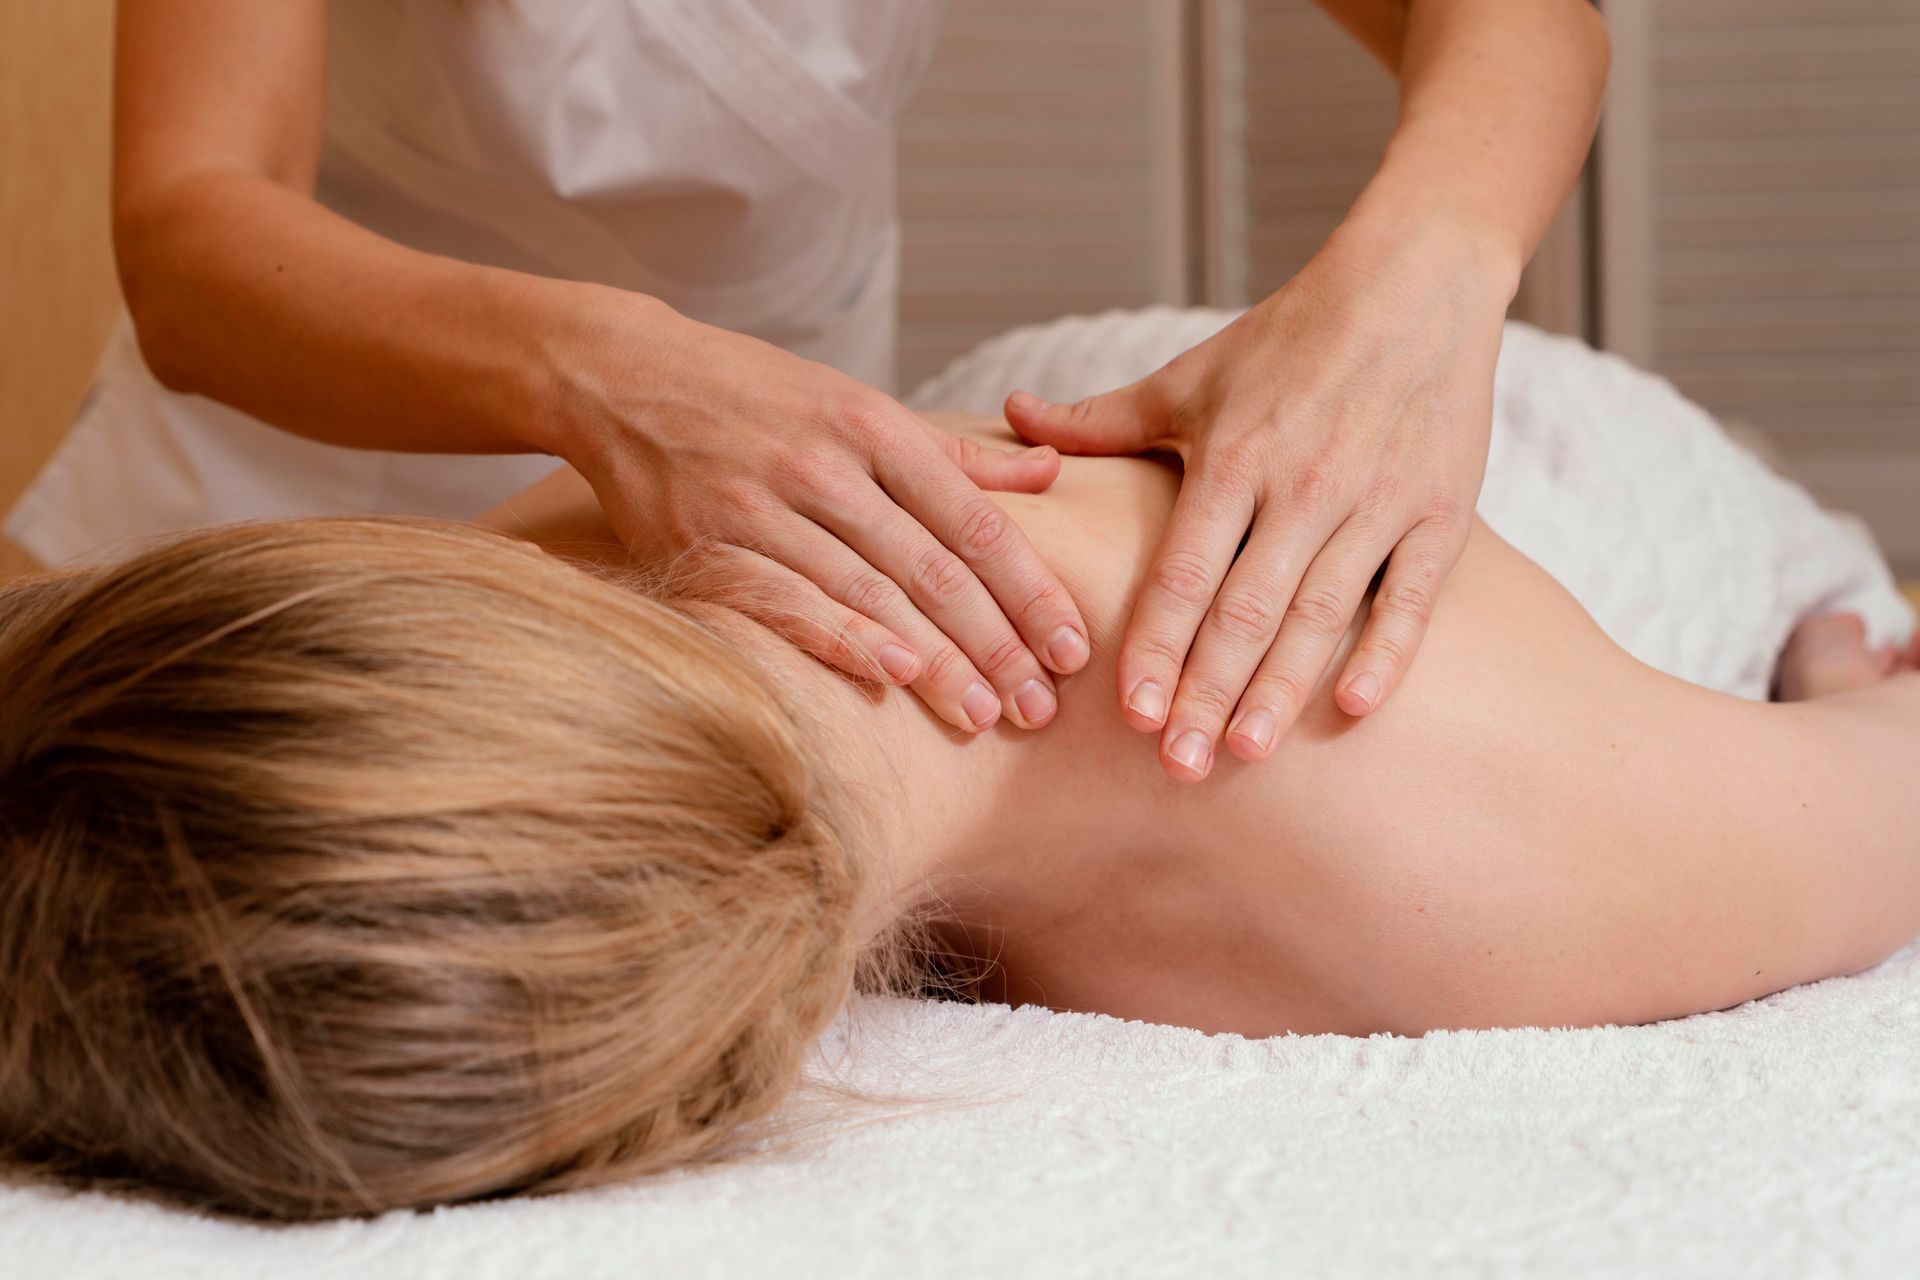 A woman is getting a massage on her back in a spa.